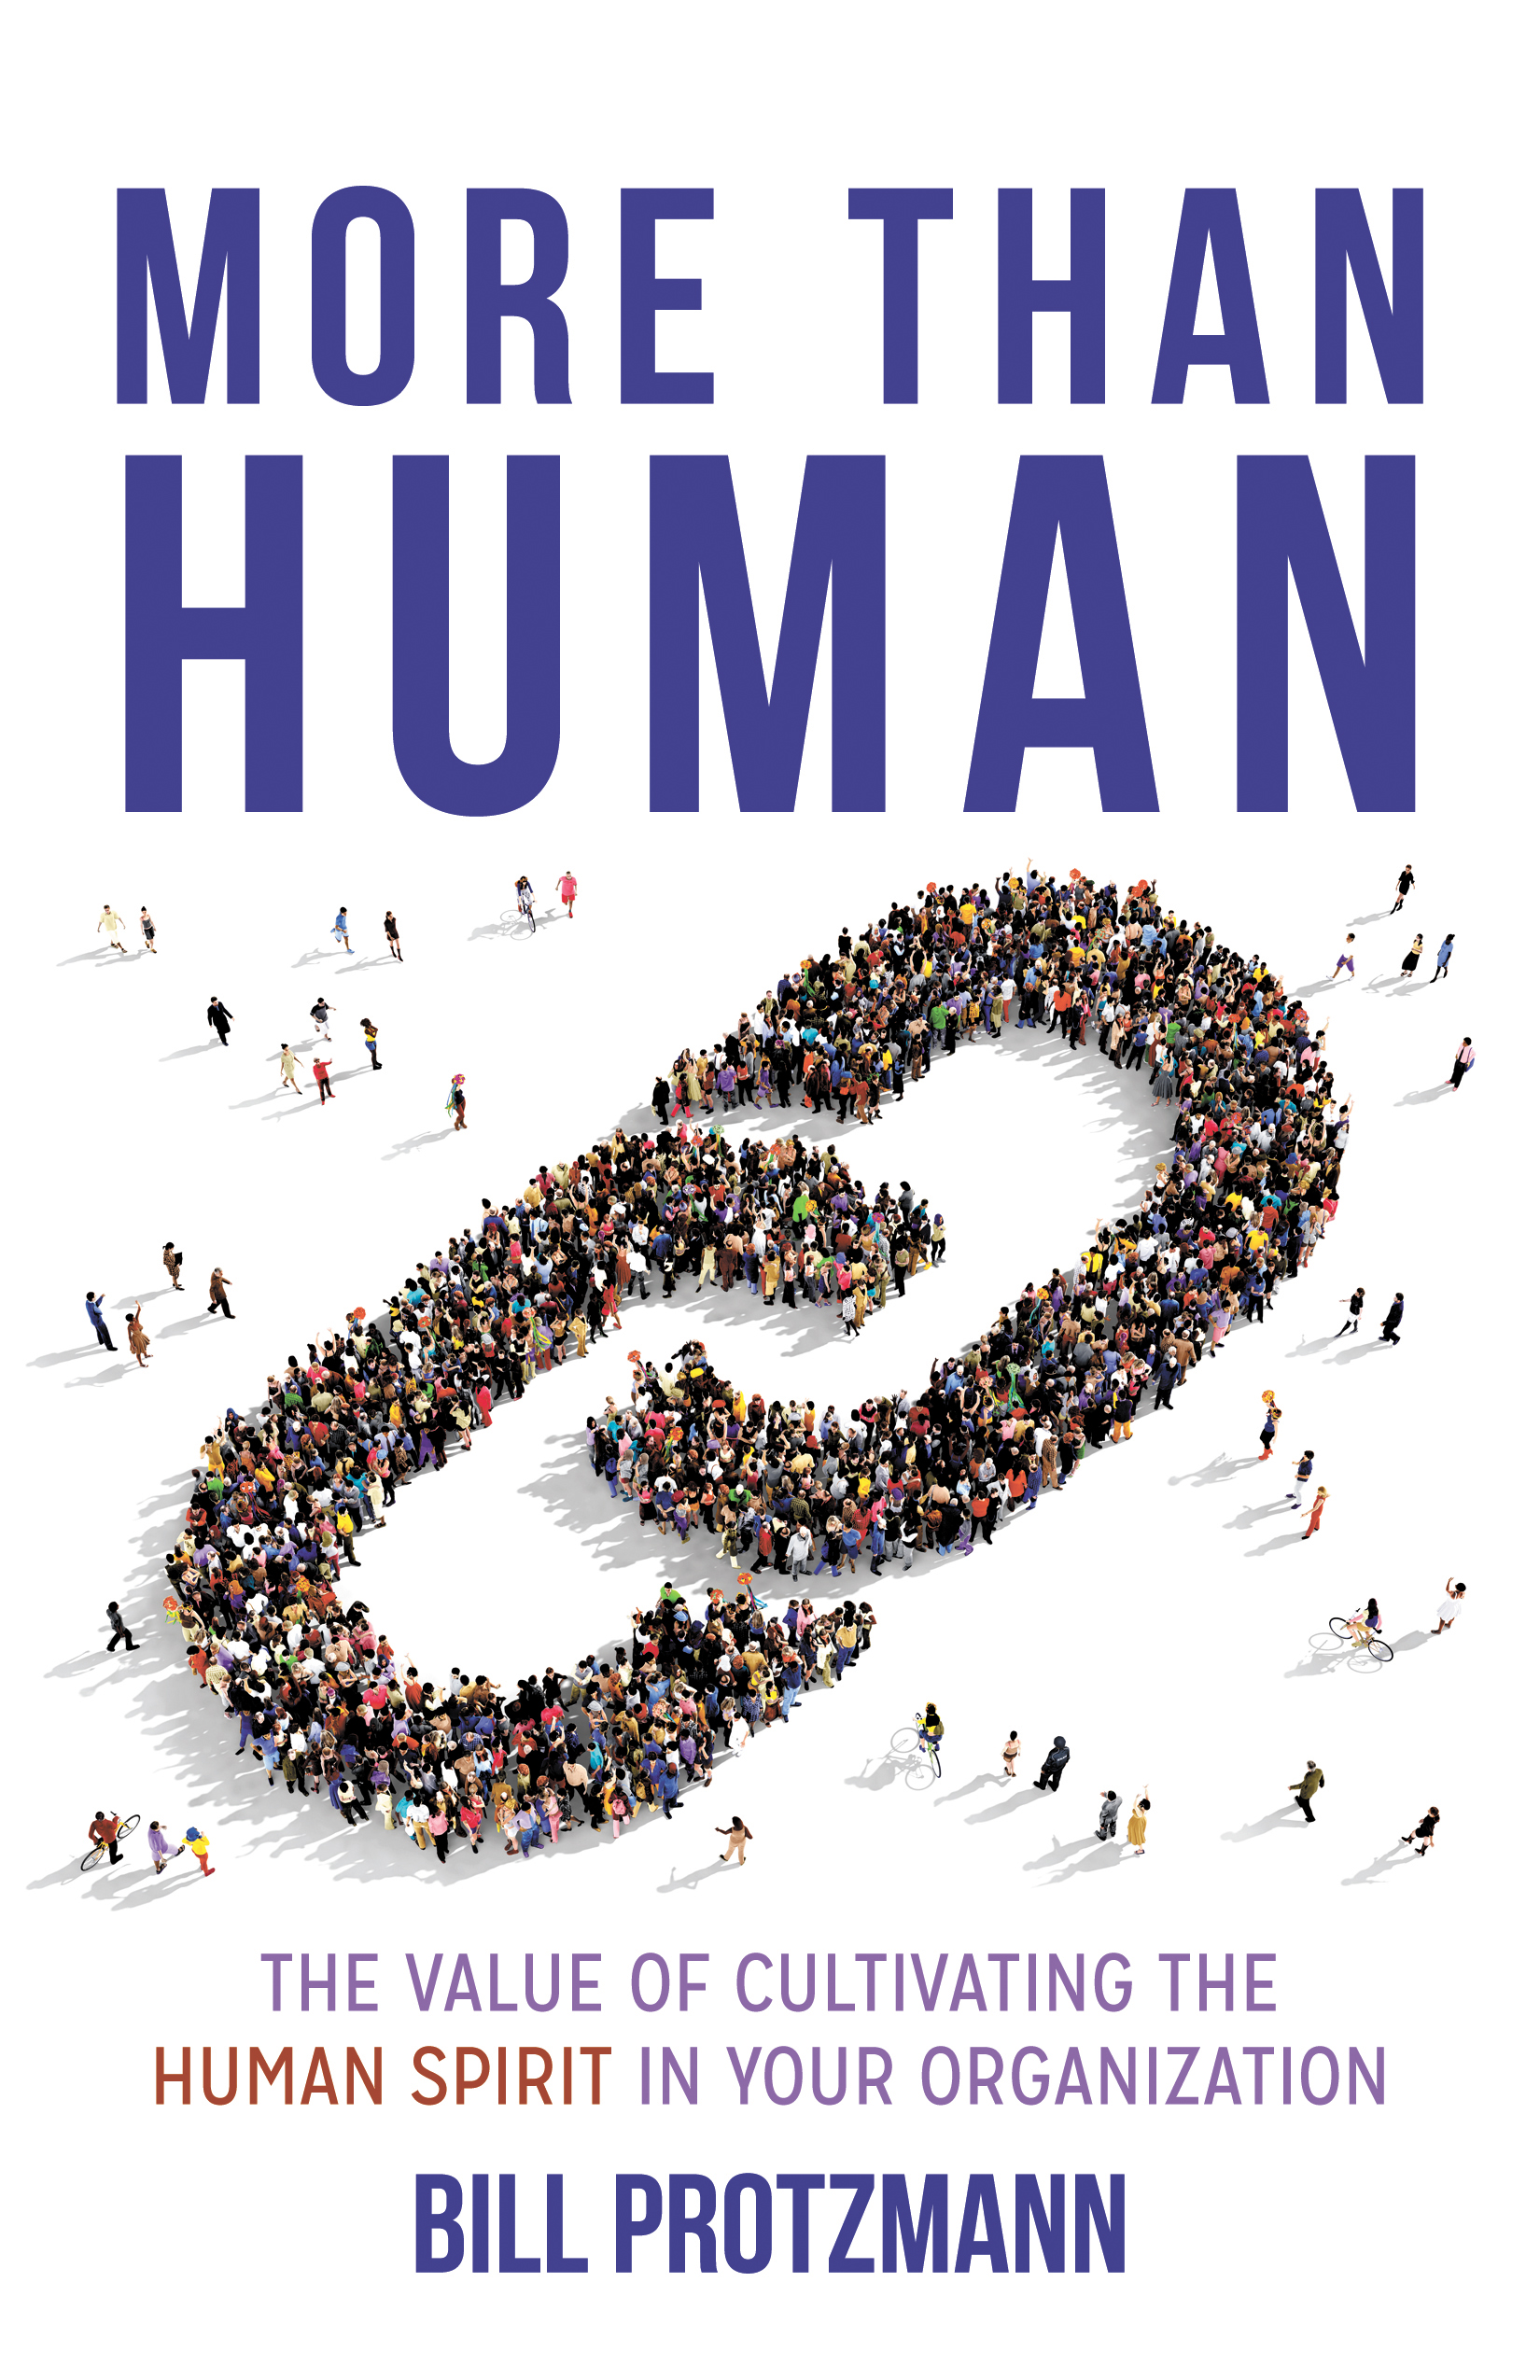 FREE: More Than Human – The Value of Cultivating the Human Spirit in Your Organization by Bill Protzmann